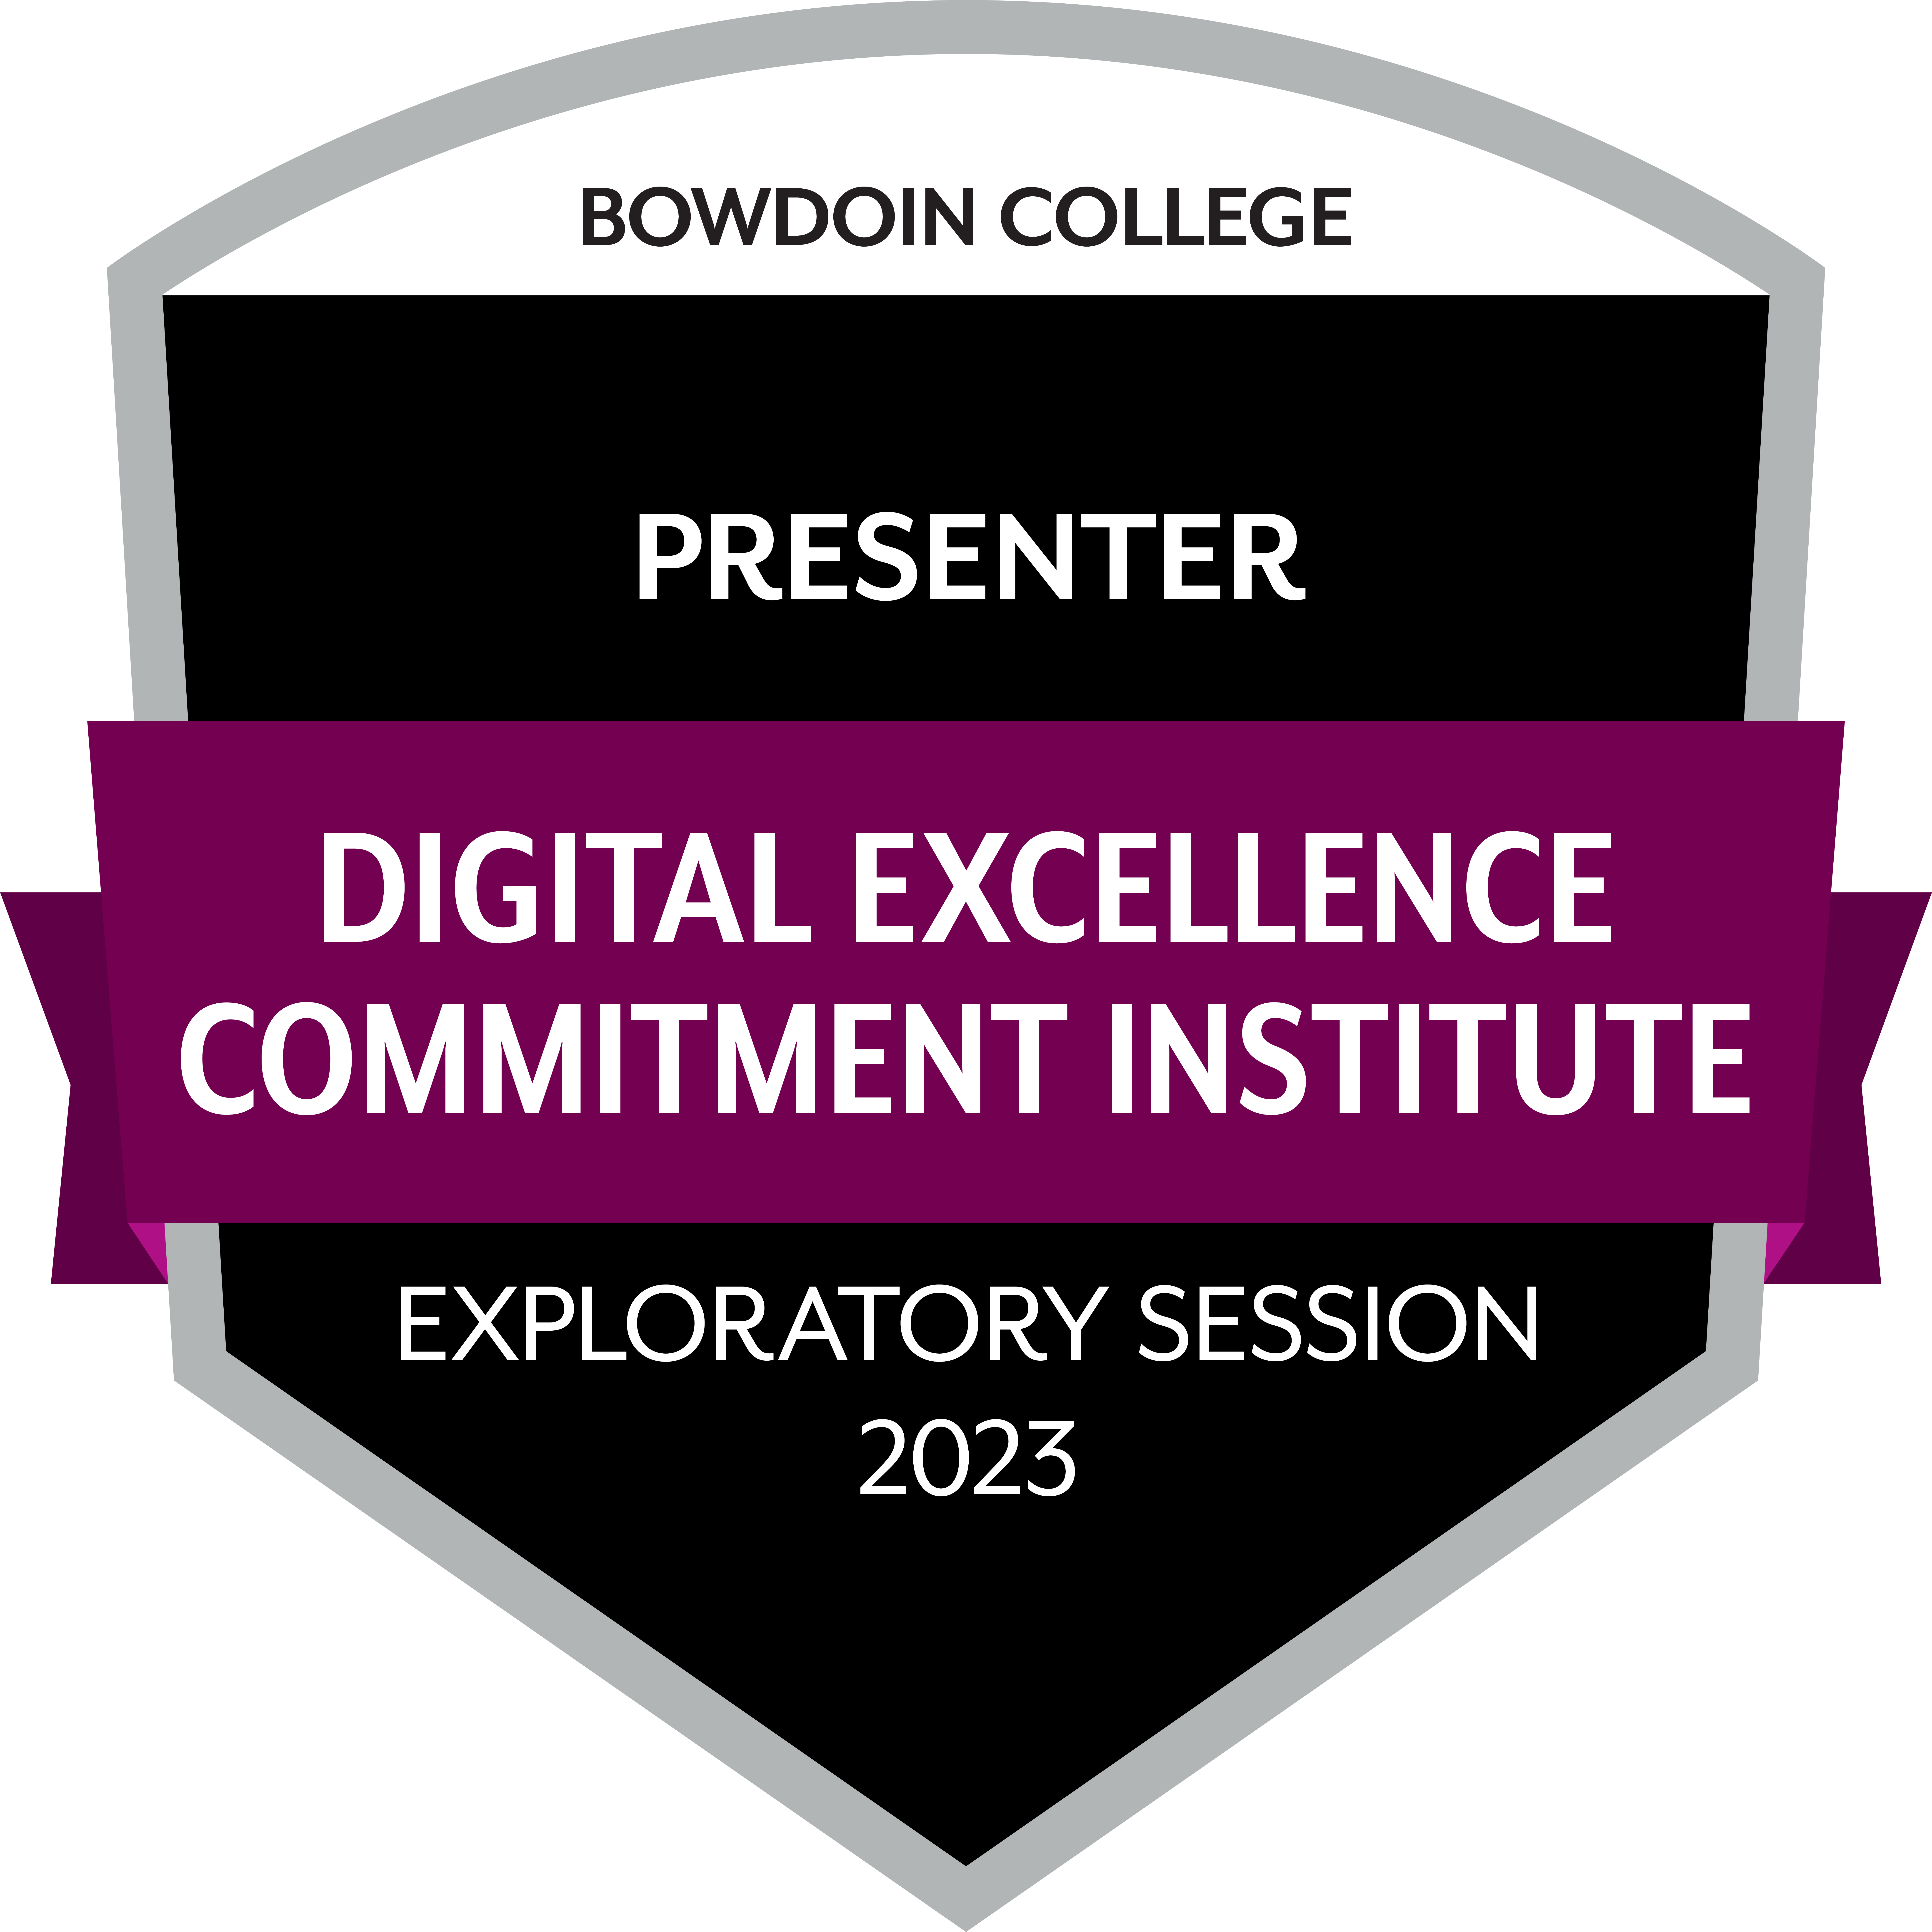 Digital badge credential information for the Exploratory session presenters